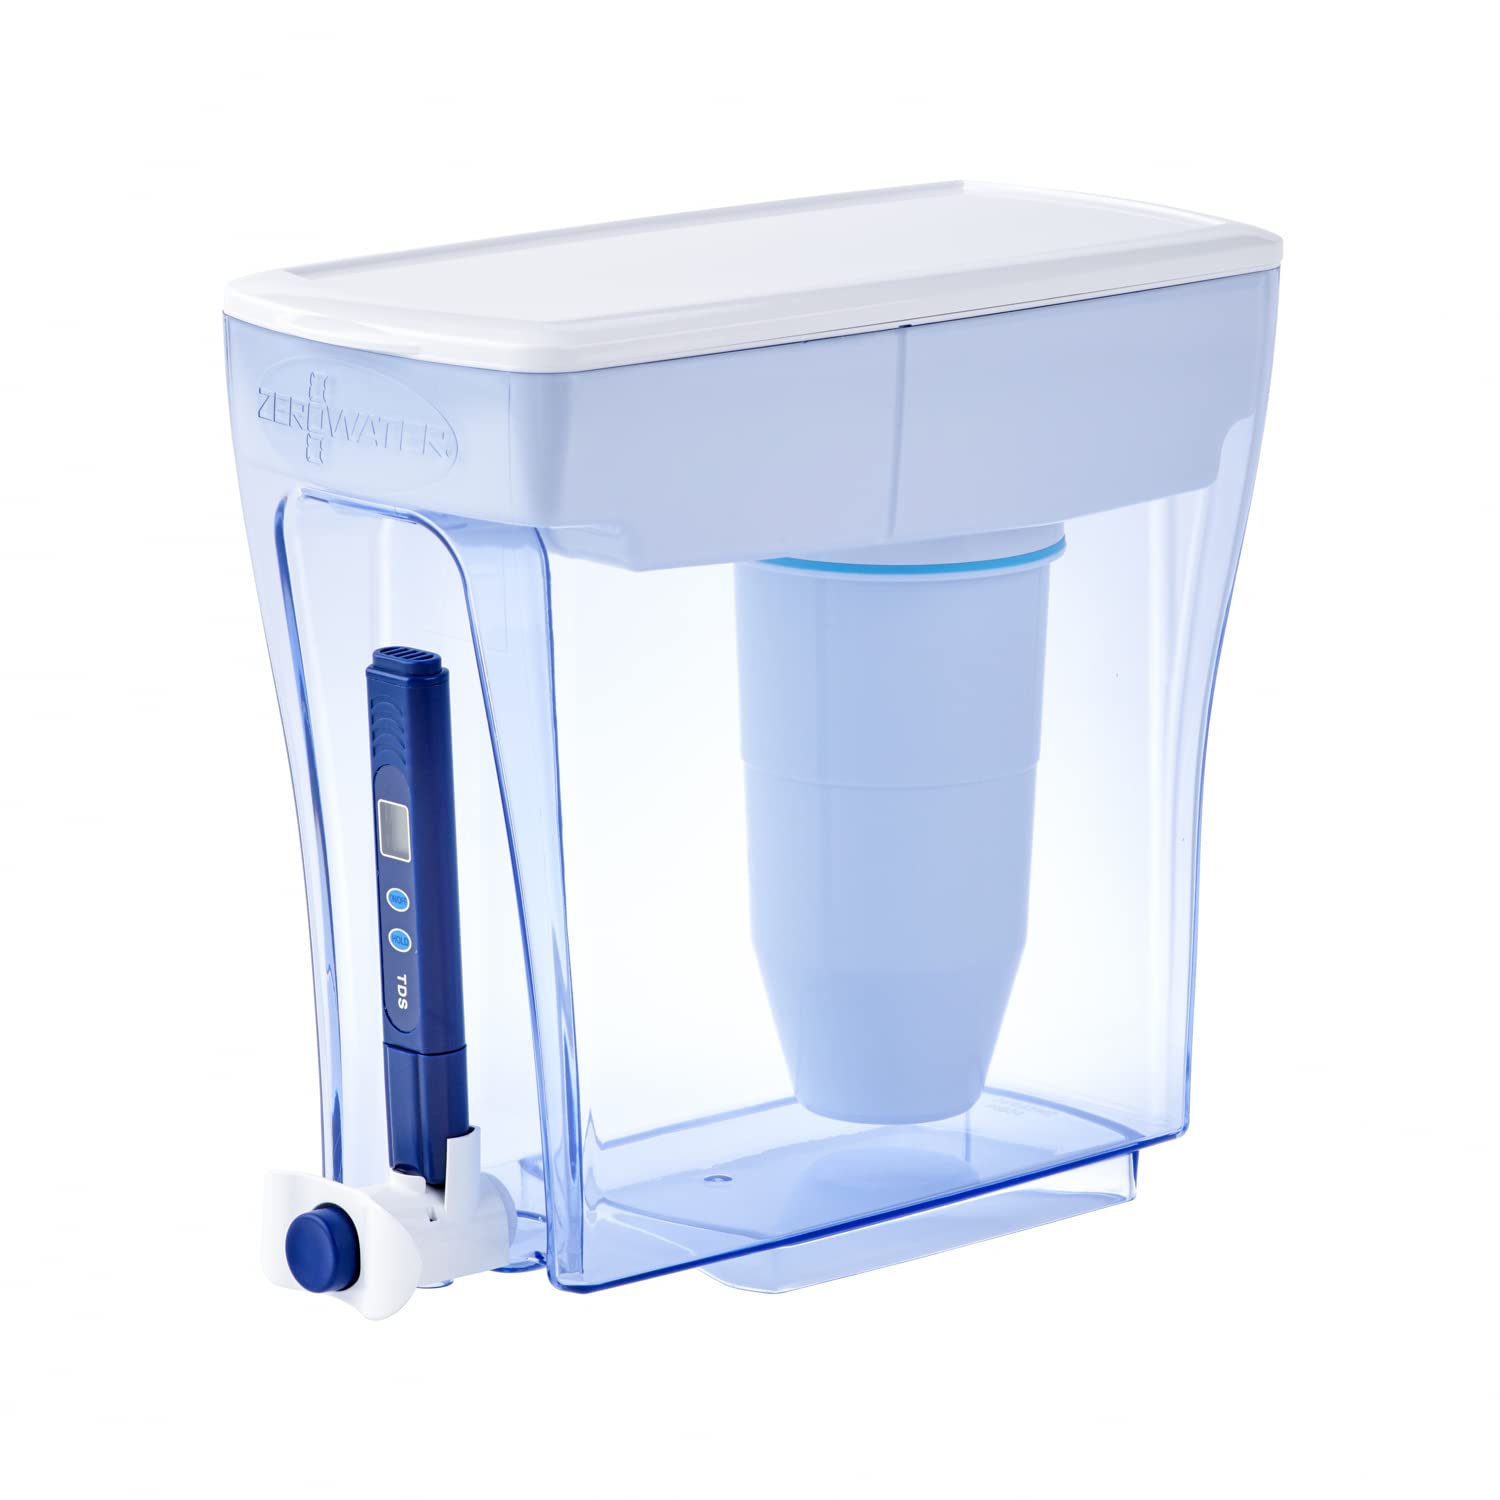 ZeroWater 20-Cup Ready-Pour 5-Stage Water Filter Pitcher 0 TDS for Improved Tap Water Taste